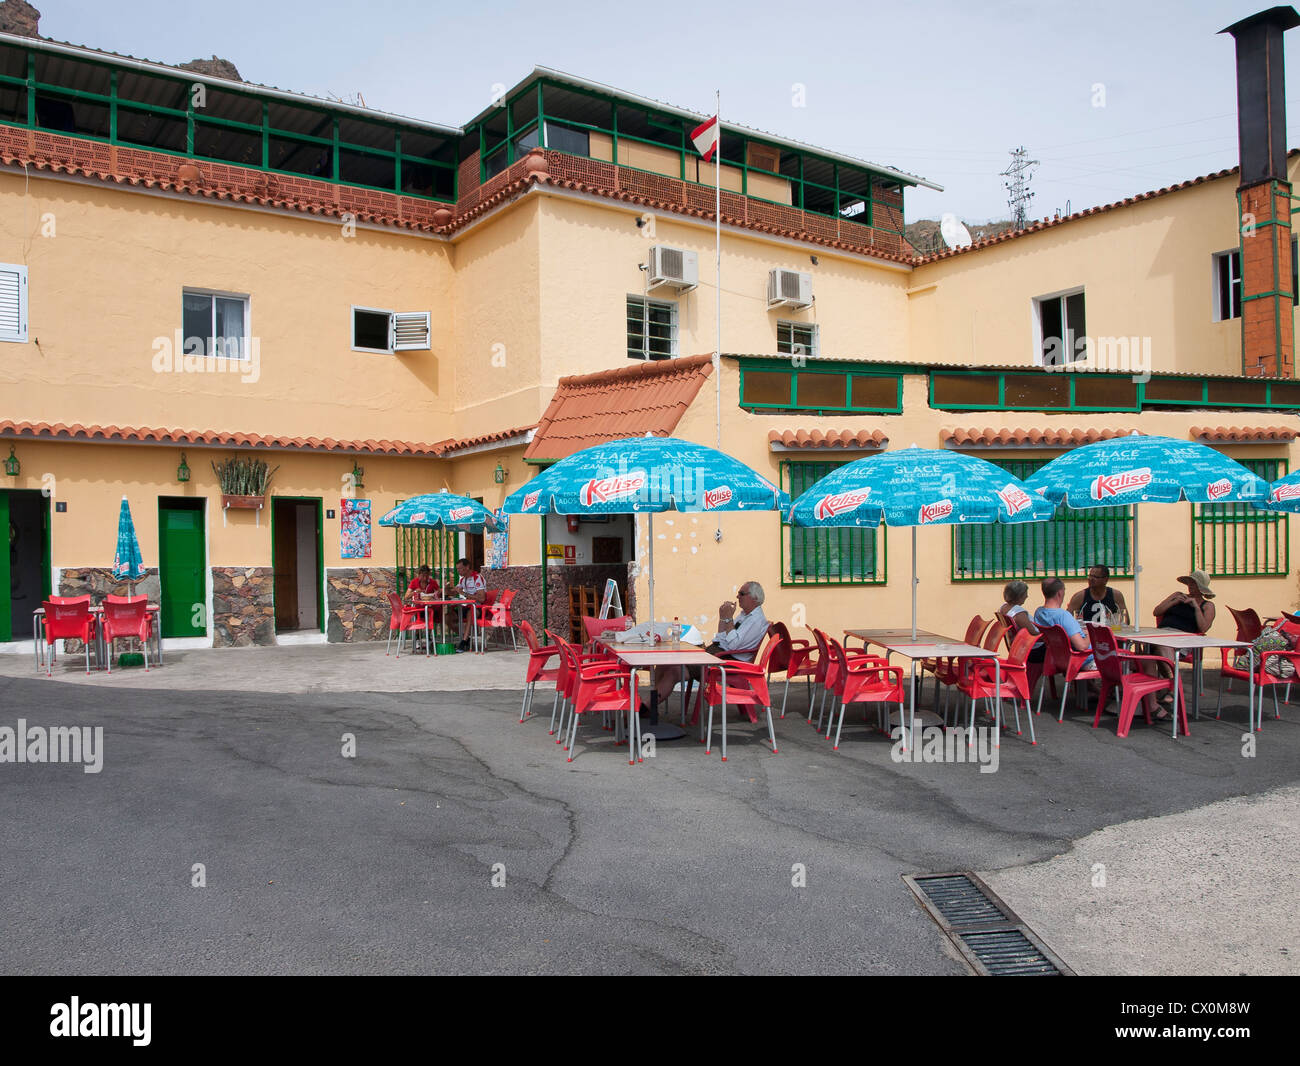 A restaurant in Soria village Gran Canaria offers shade under the umbrellas and local dishes on the menu Stock Photo